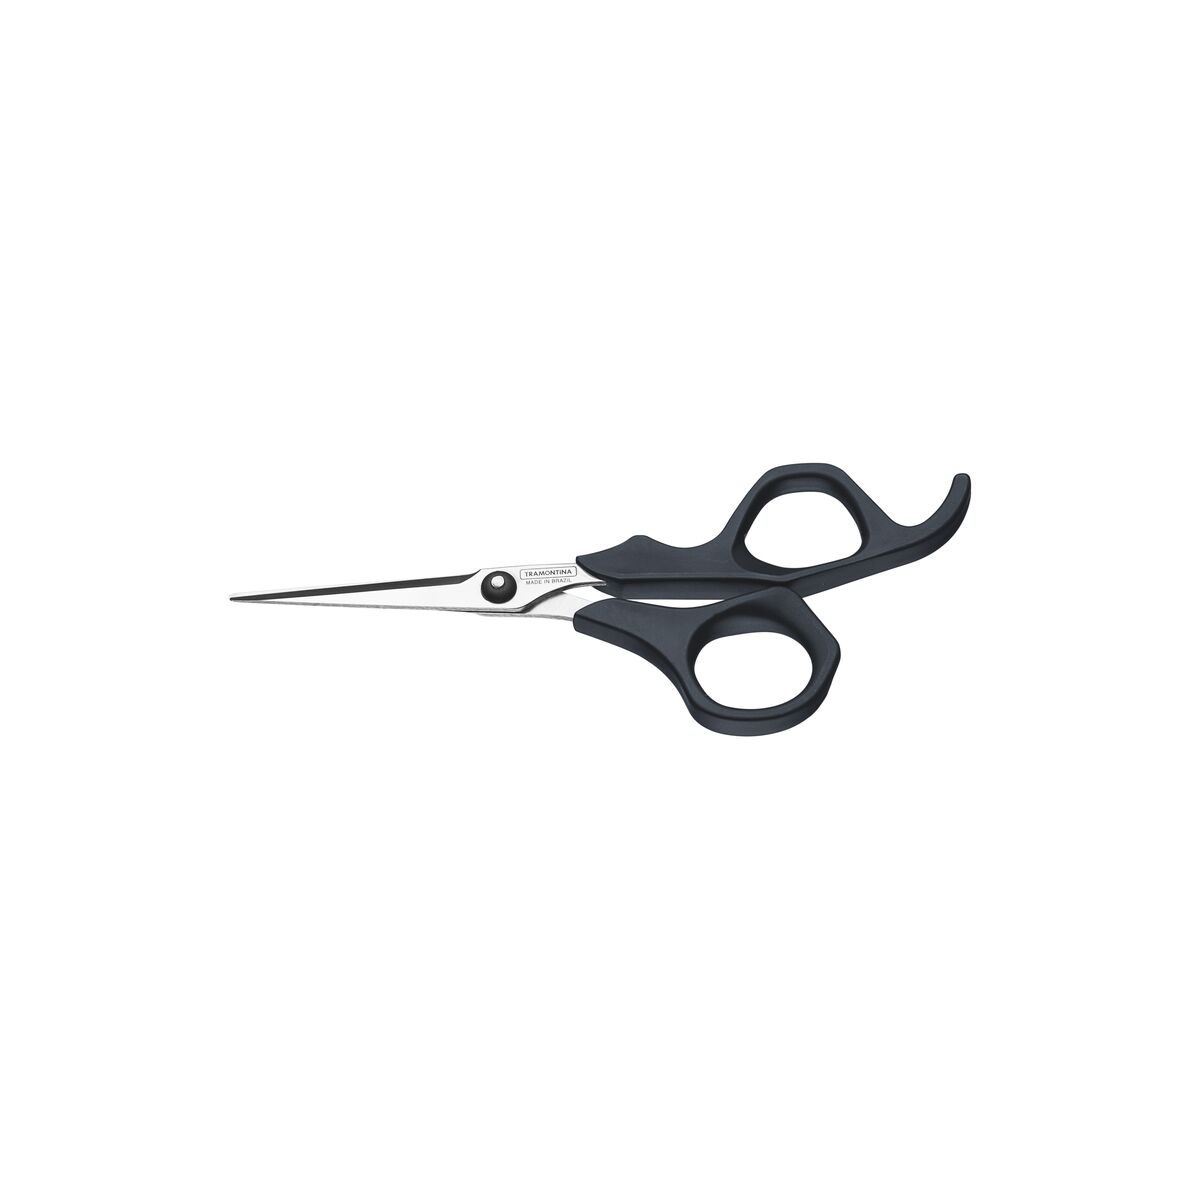 Tramontina Supercort Hair Scissors with Stainless-Steel Blade with Blade Cutting-Edge and Onyx Polypropylene Handle 5"